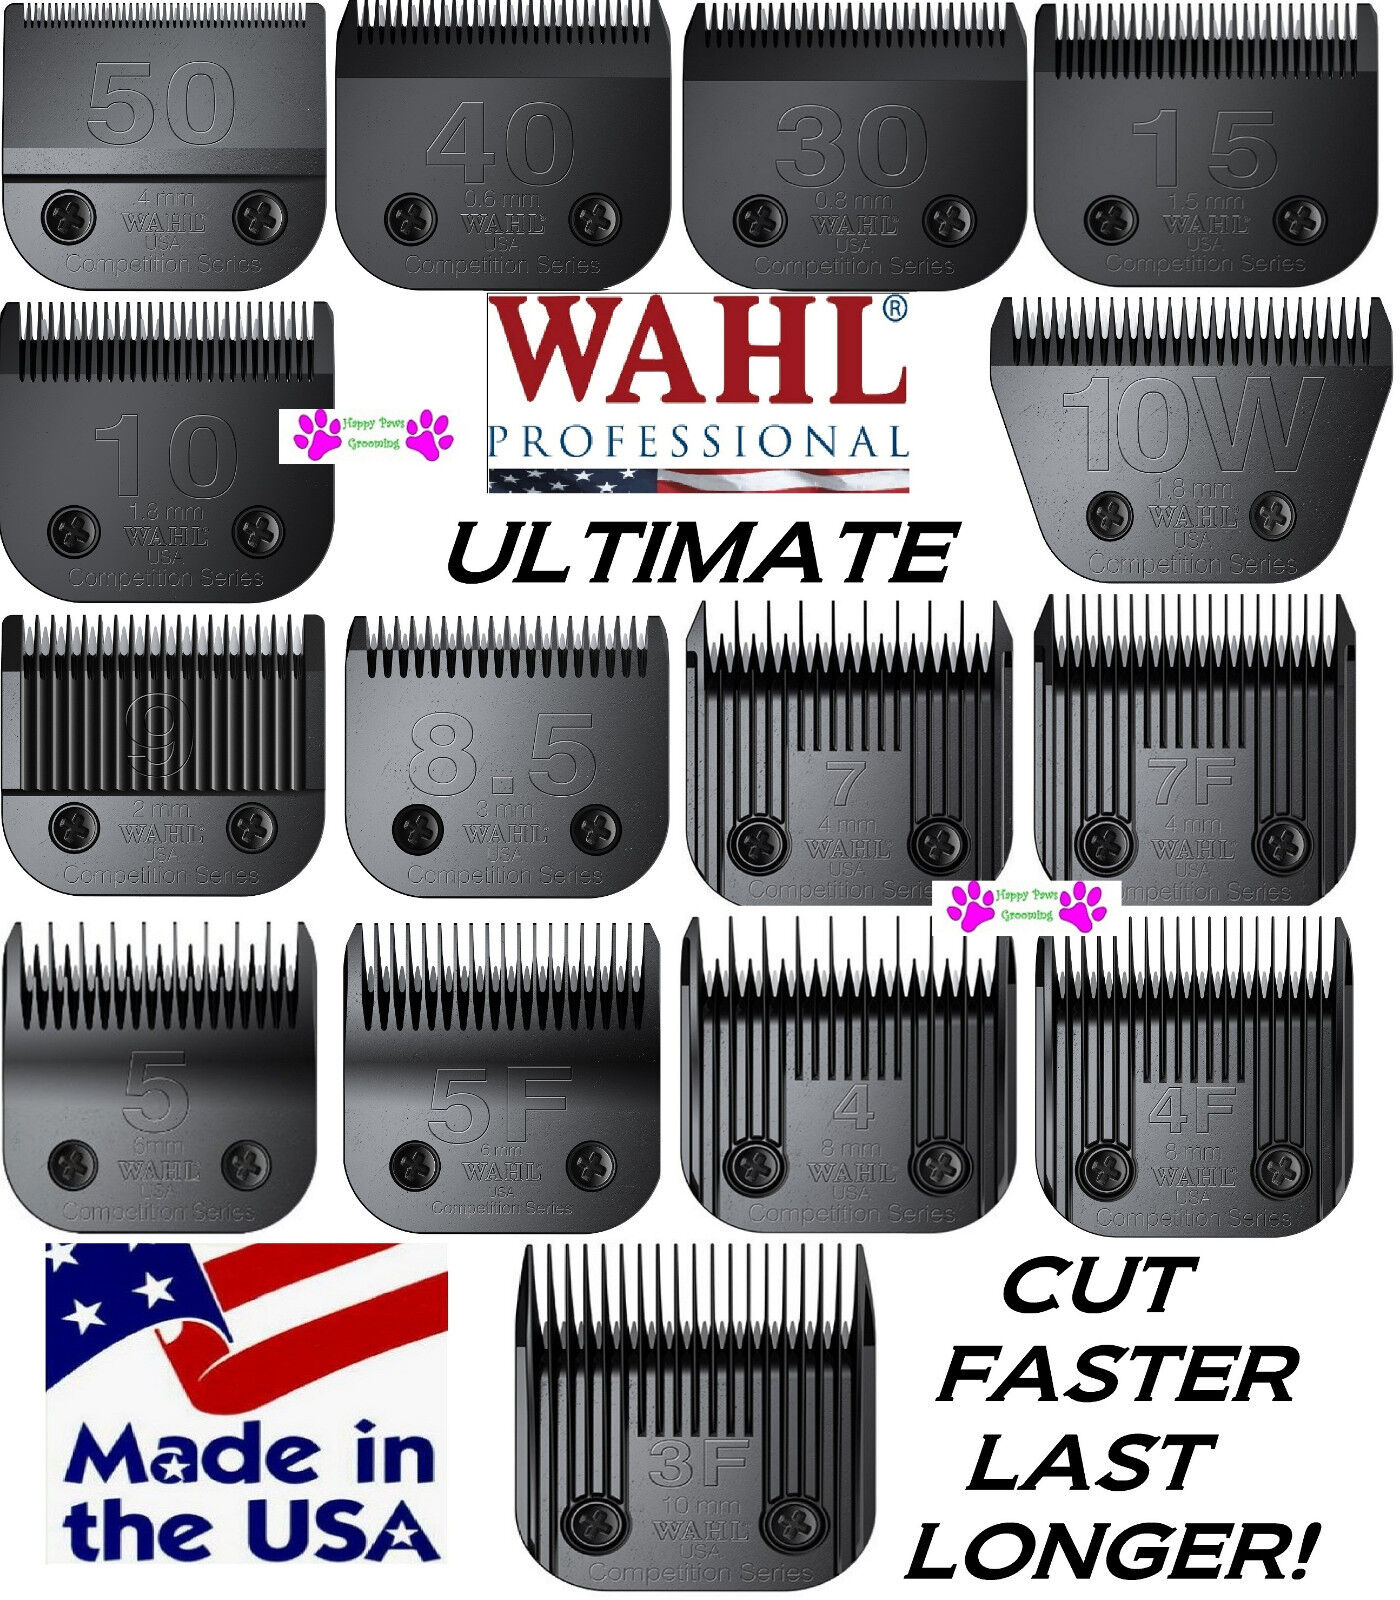 Wahl ULTIMATE キャンペーンもお見逃しなく COMPETITION BLADE Fit KM1 KM2 KM10 45 【SEAL限定商品】 Pow KM5 Max